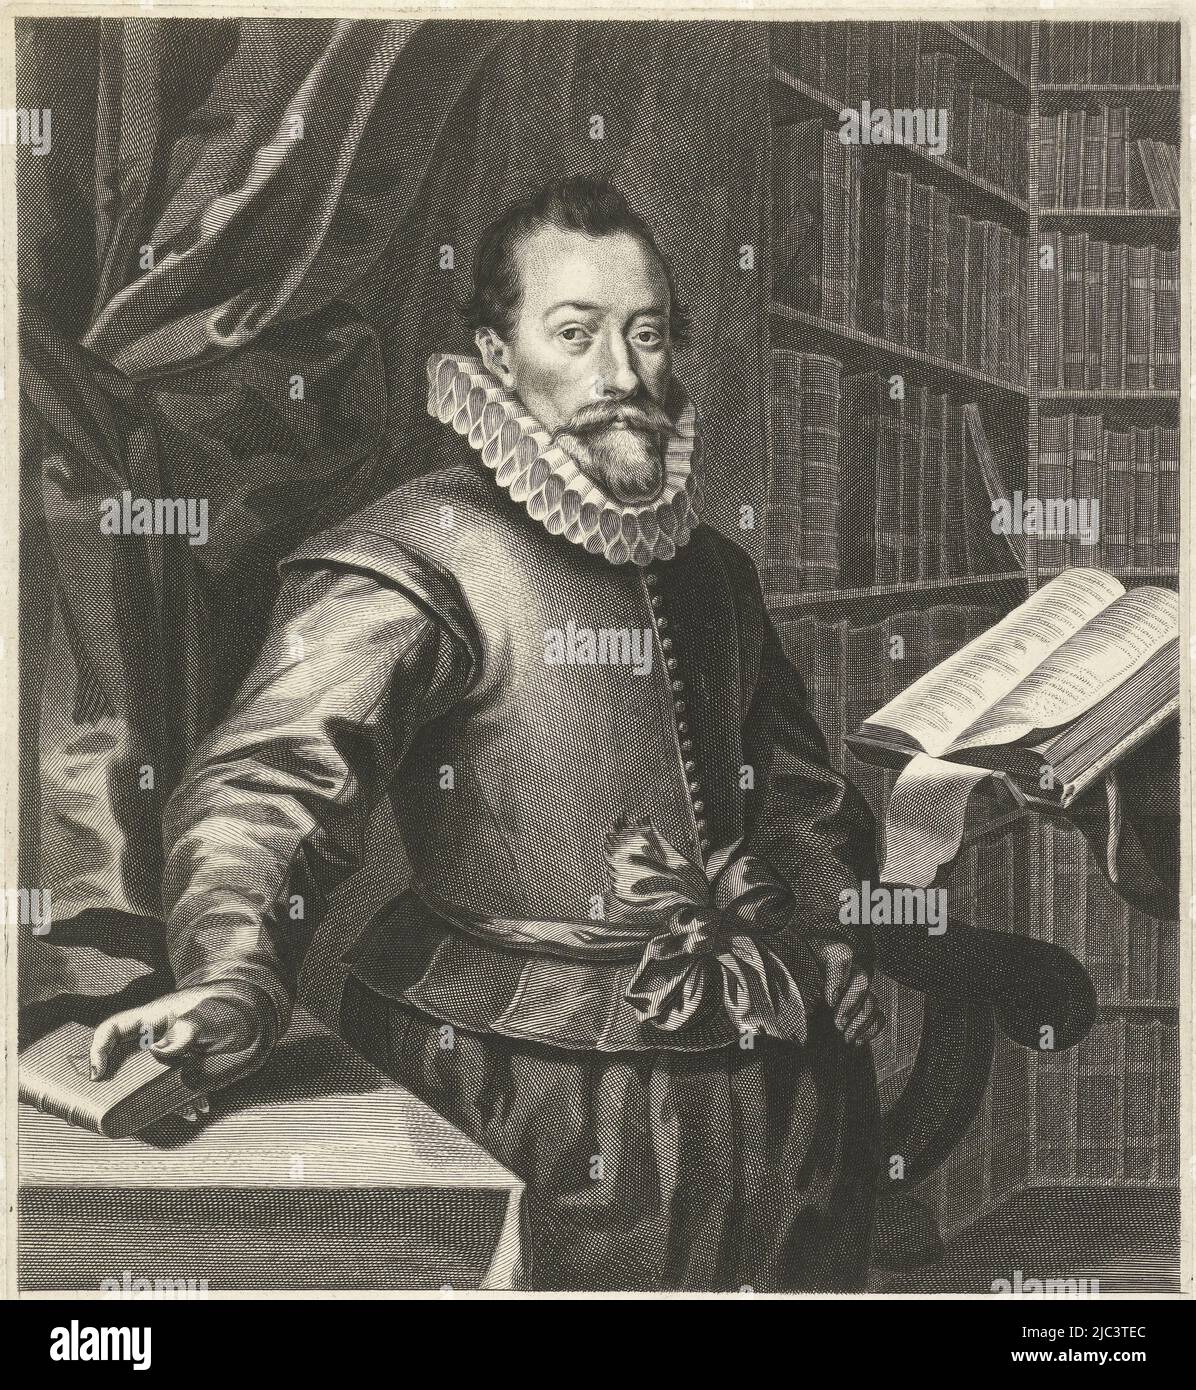 Portrait of Jacobus Taurinus, standing at a lectern in a library. Below the portrait is a verse of eight lines in Dutch., Portrait of Jacobus Taurinus, print maker: Hendrik Bary, (mentioned on object), Geeraert Brandt (I), (mentioned on object), Netherlands, 1657 - 1707, paper, engraving, h 280 mm × w 205 mm Stock Photo